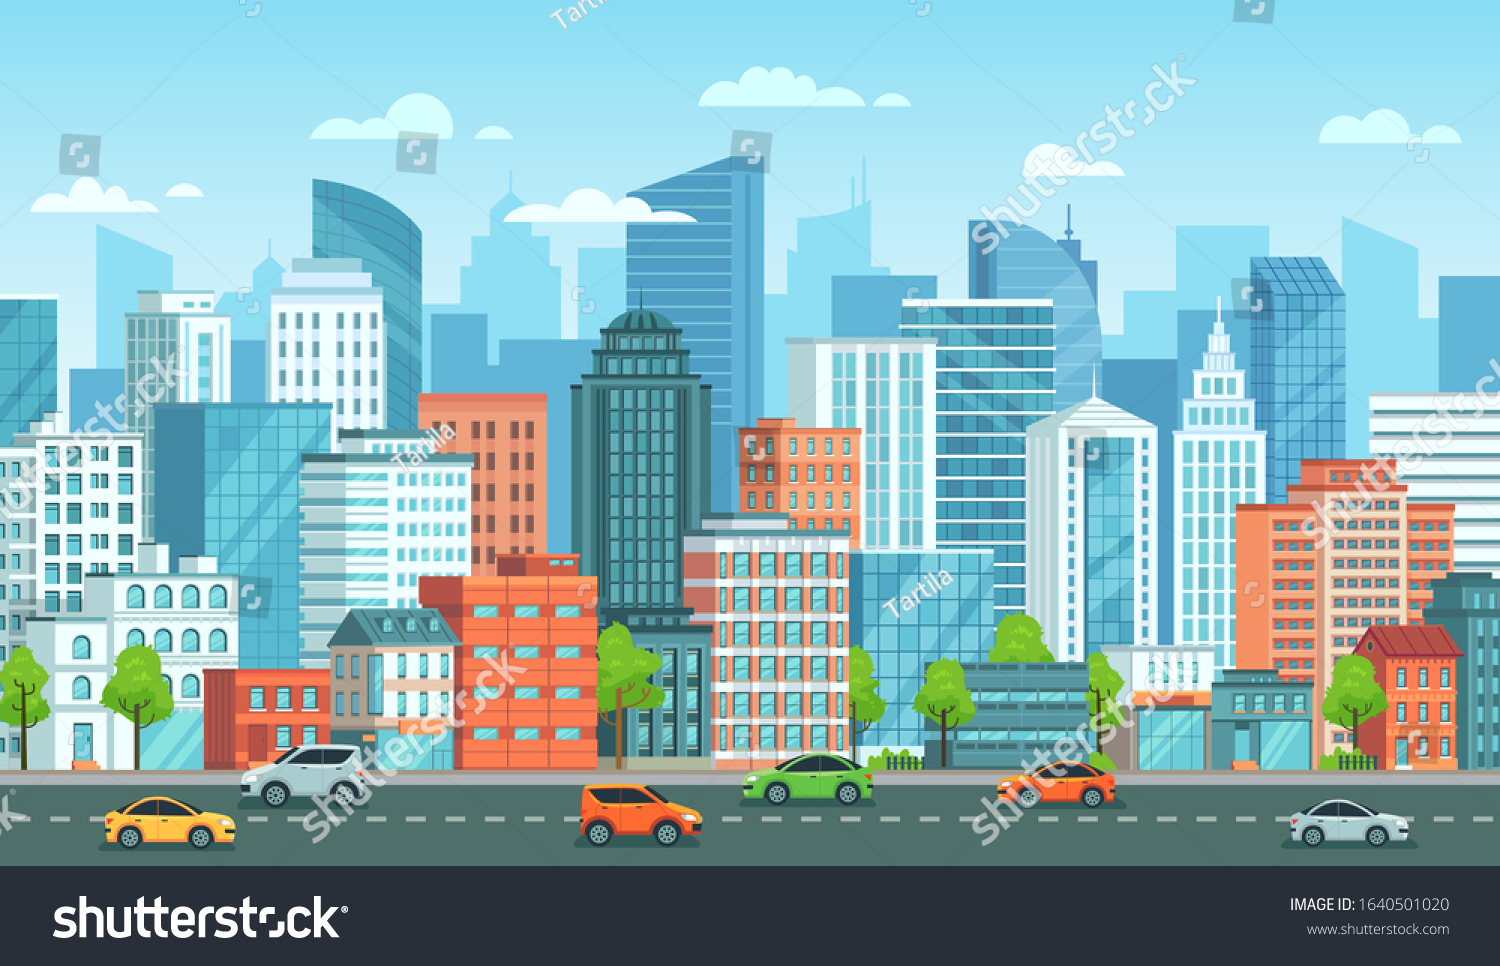 Cityscape with cars. City street with road, town buildings and urban car cartoon vector illustration. Panoramic view with automobiles riding against modern downtown skyscrapers on background. #1640501020